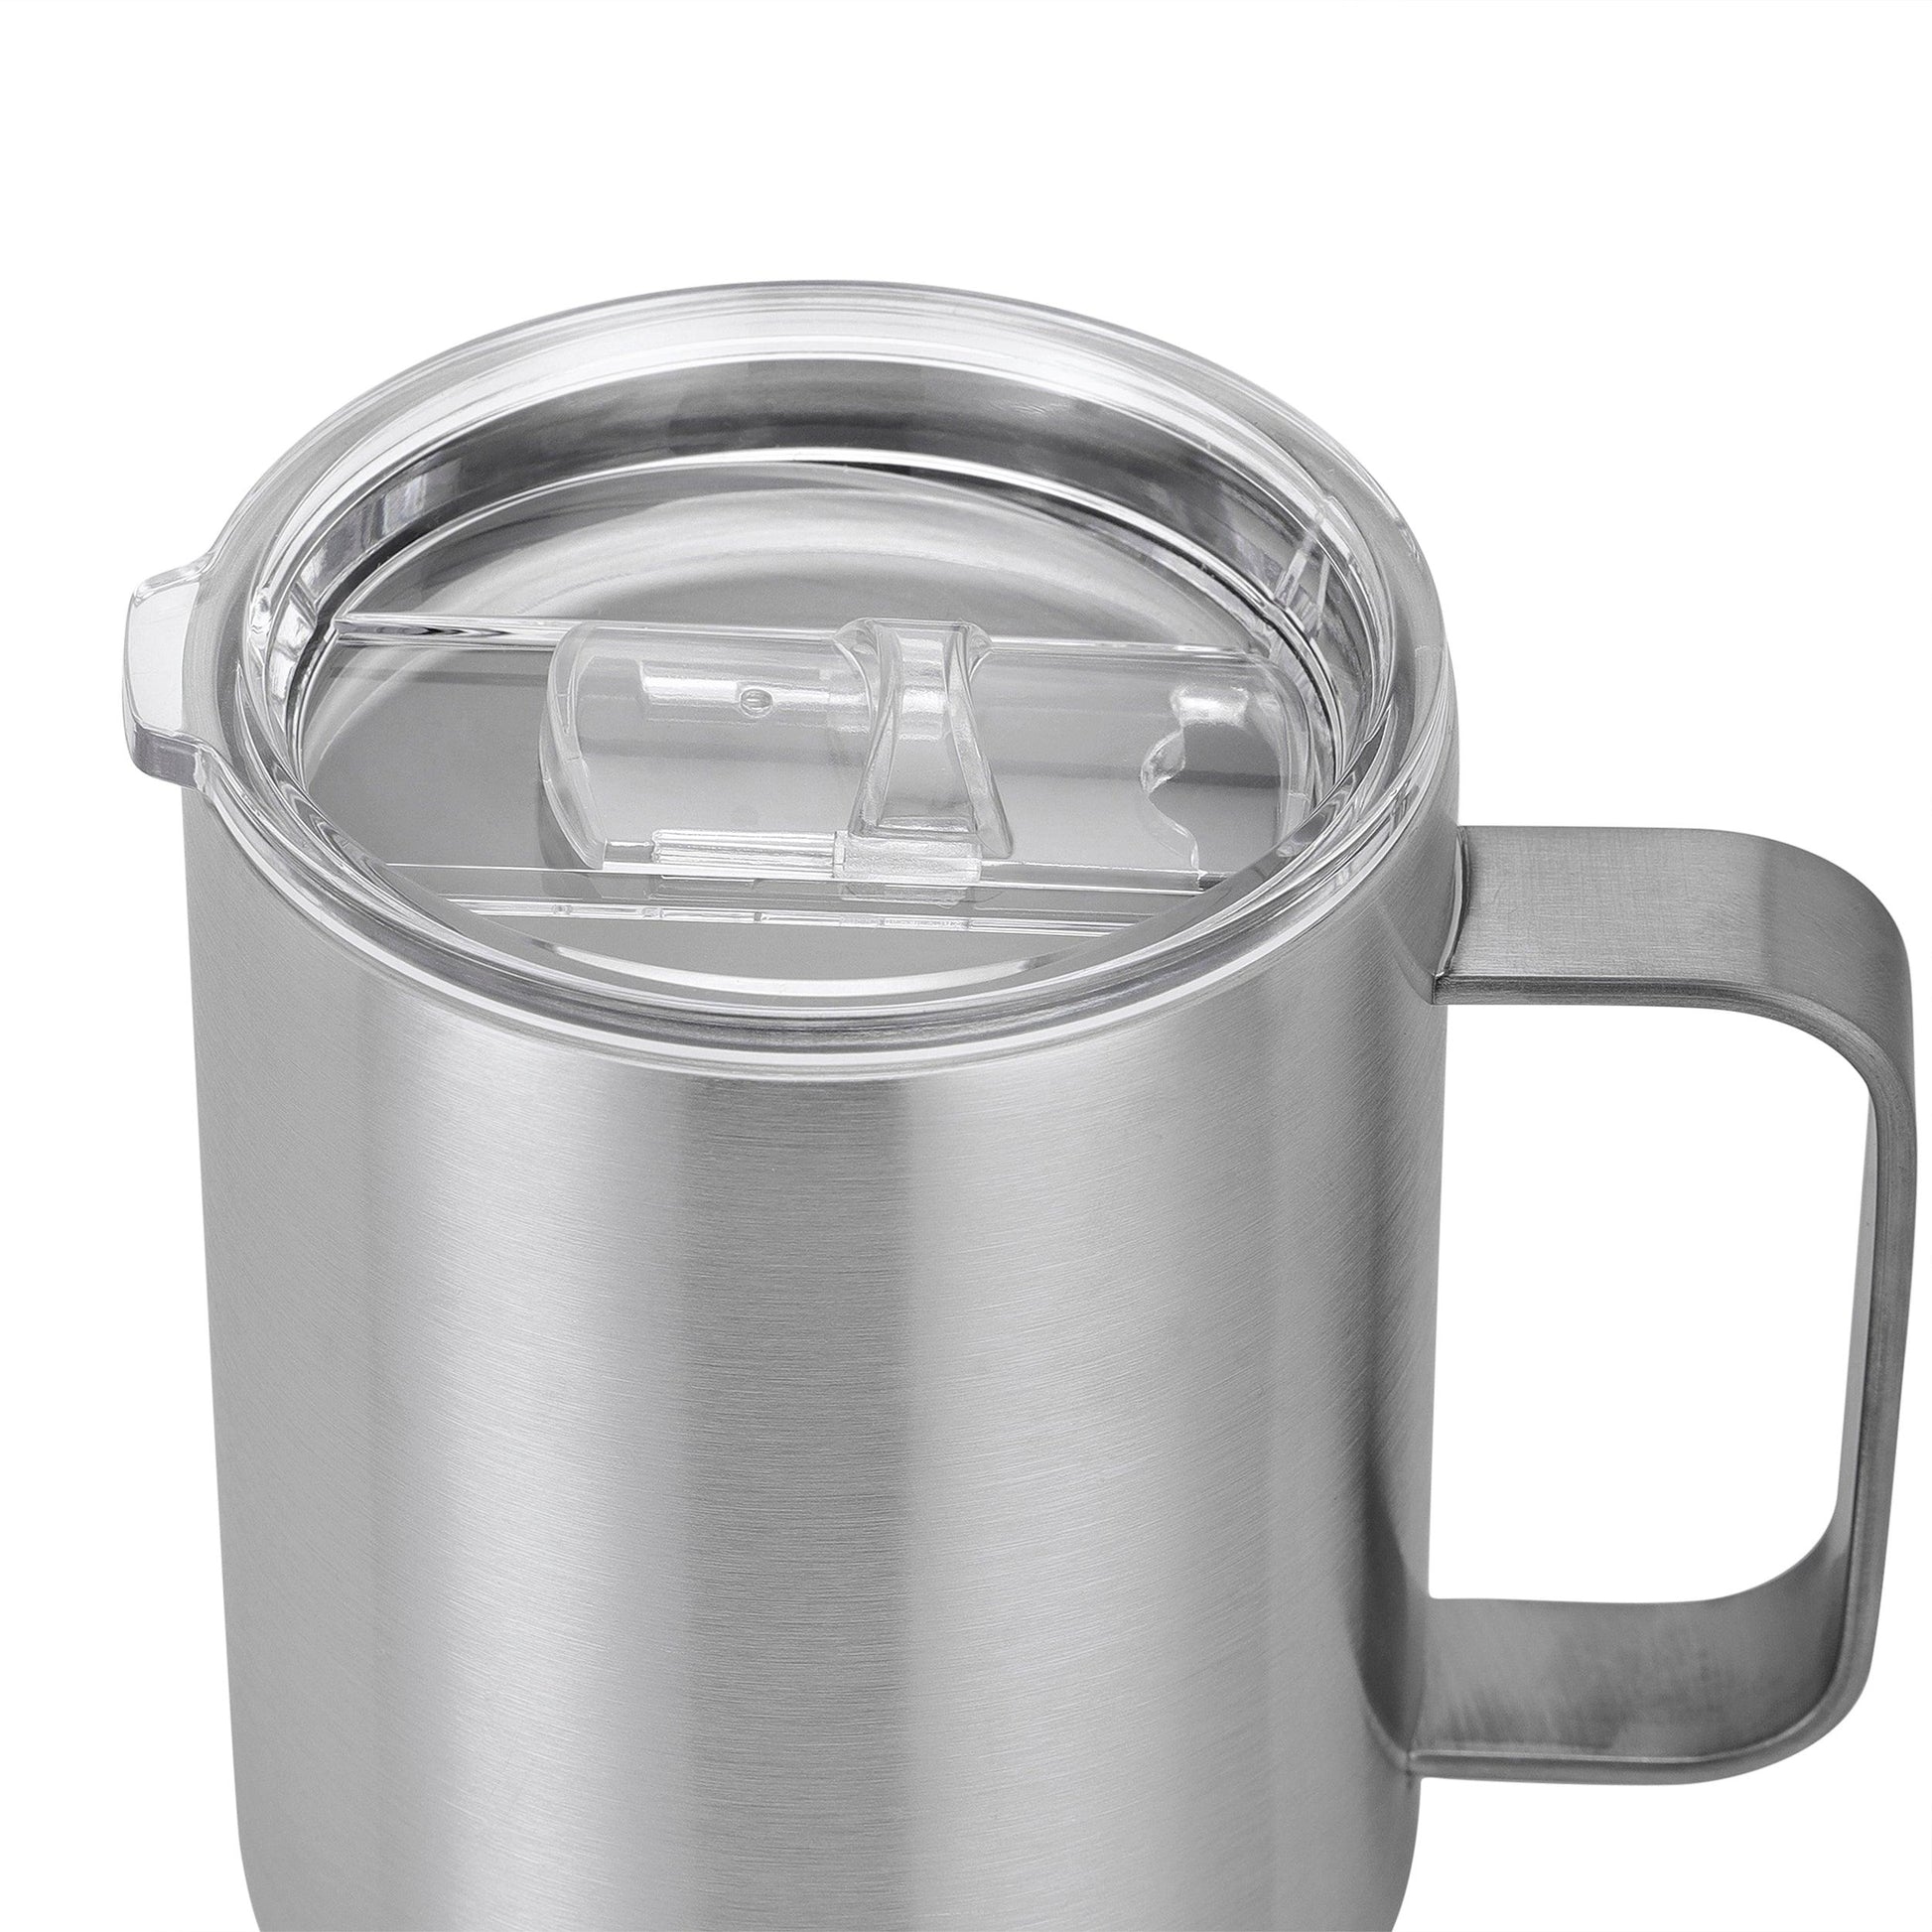 MakerFlo Crafts Straight Sippy Cup, with 2 Lid Options, Stainless Steel, 12oz